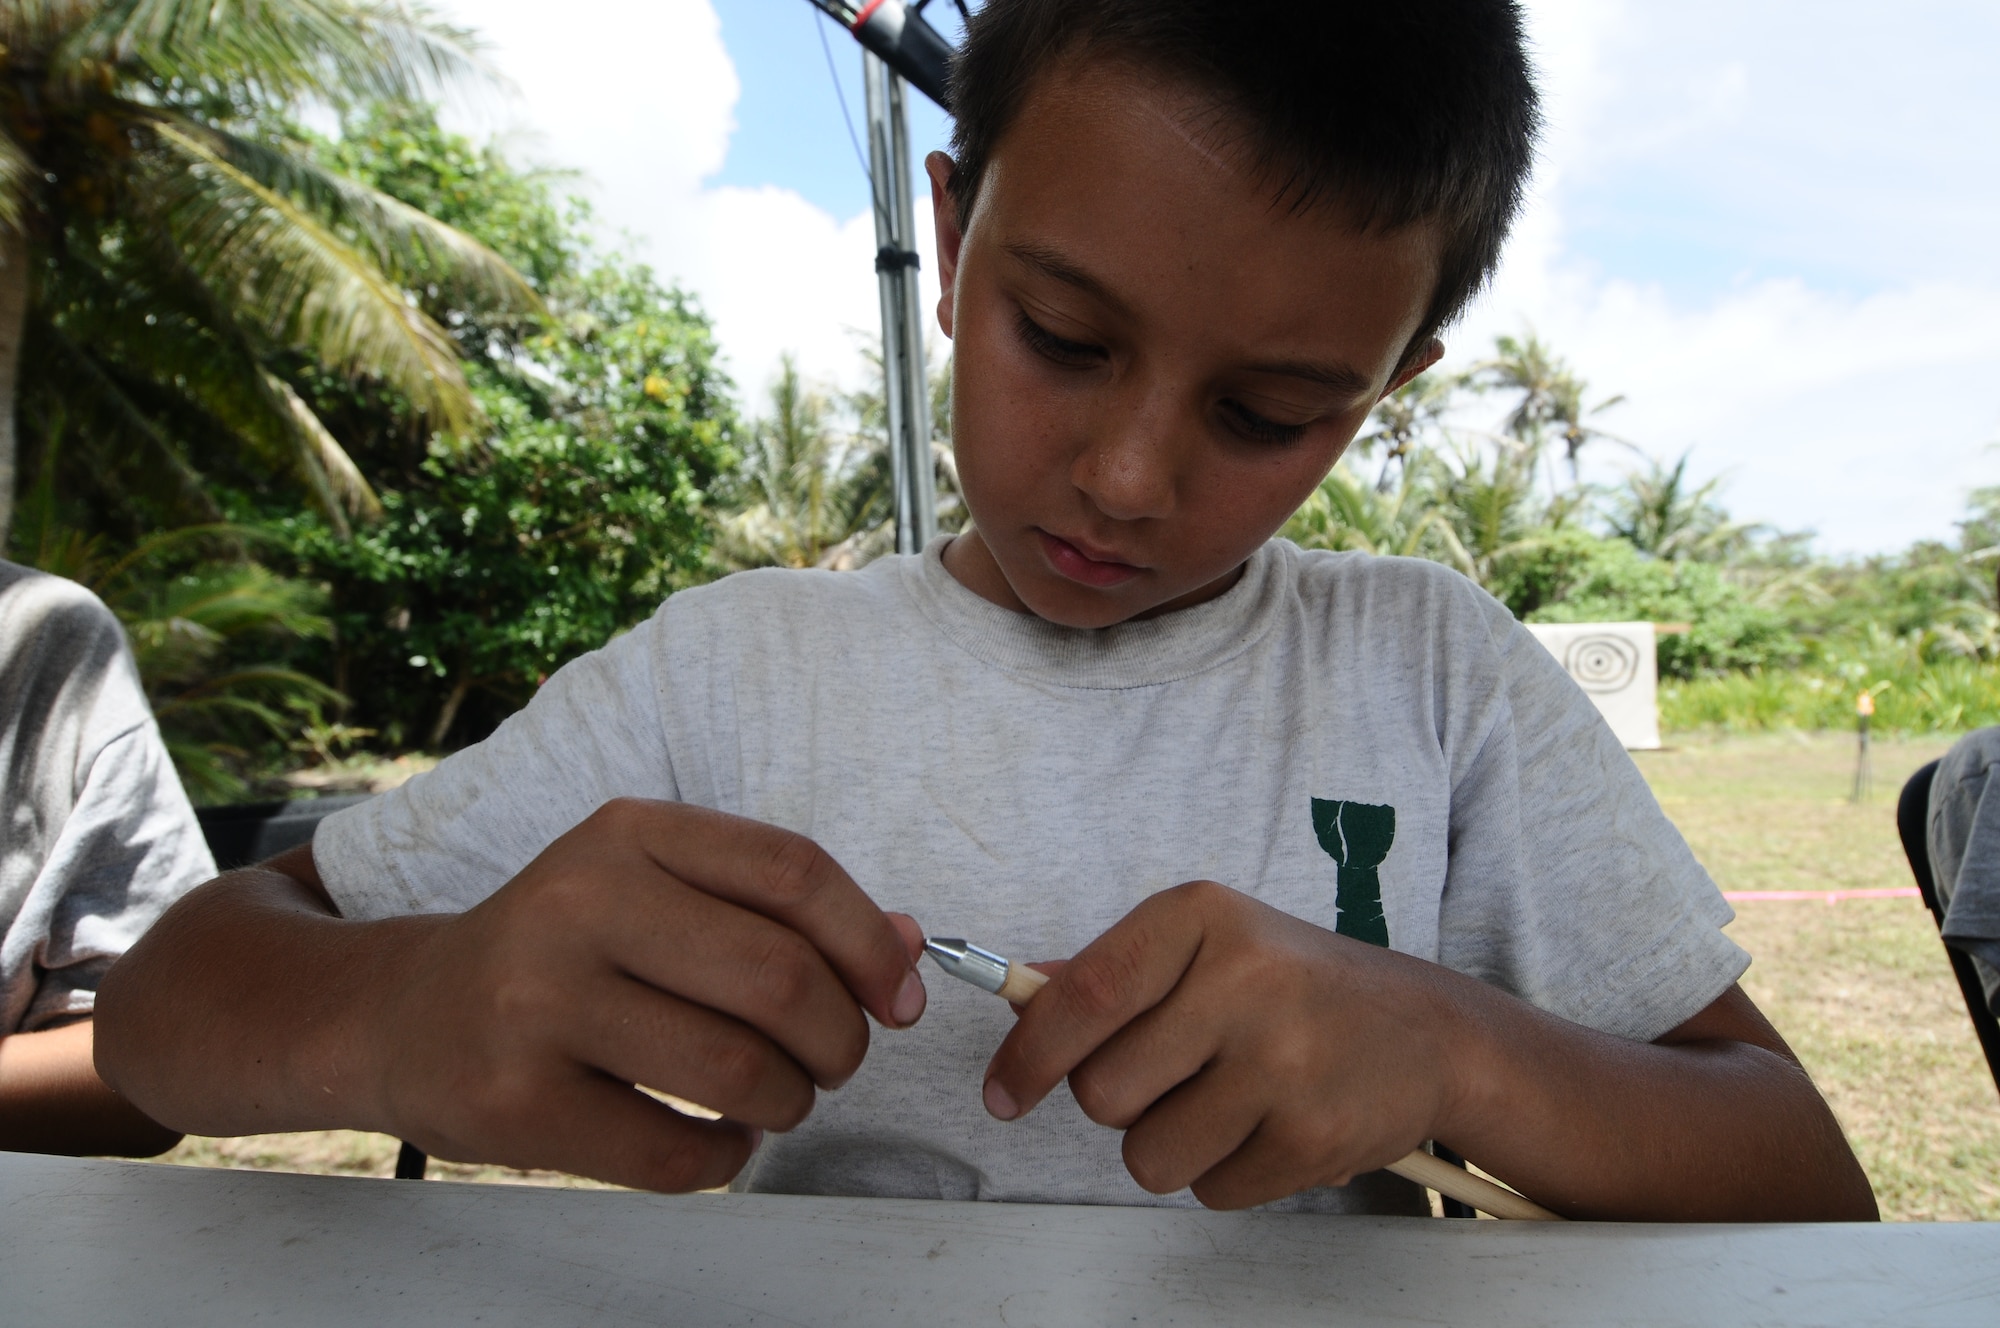 A scout works on an arrowhead during the annual Boy Scout Summer Camp in order to earn a merit badge, June 19, on Andersen Air Force Base, Guam. More than 400 merit badges were awarded at the camps conclusion and six Scouts completed final requirements that helped them achieve the rank of Eagle Scout. (U.S. Air Force photo by Airman 1st Class Mariah Haddenham/Released)